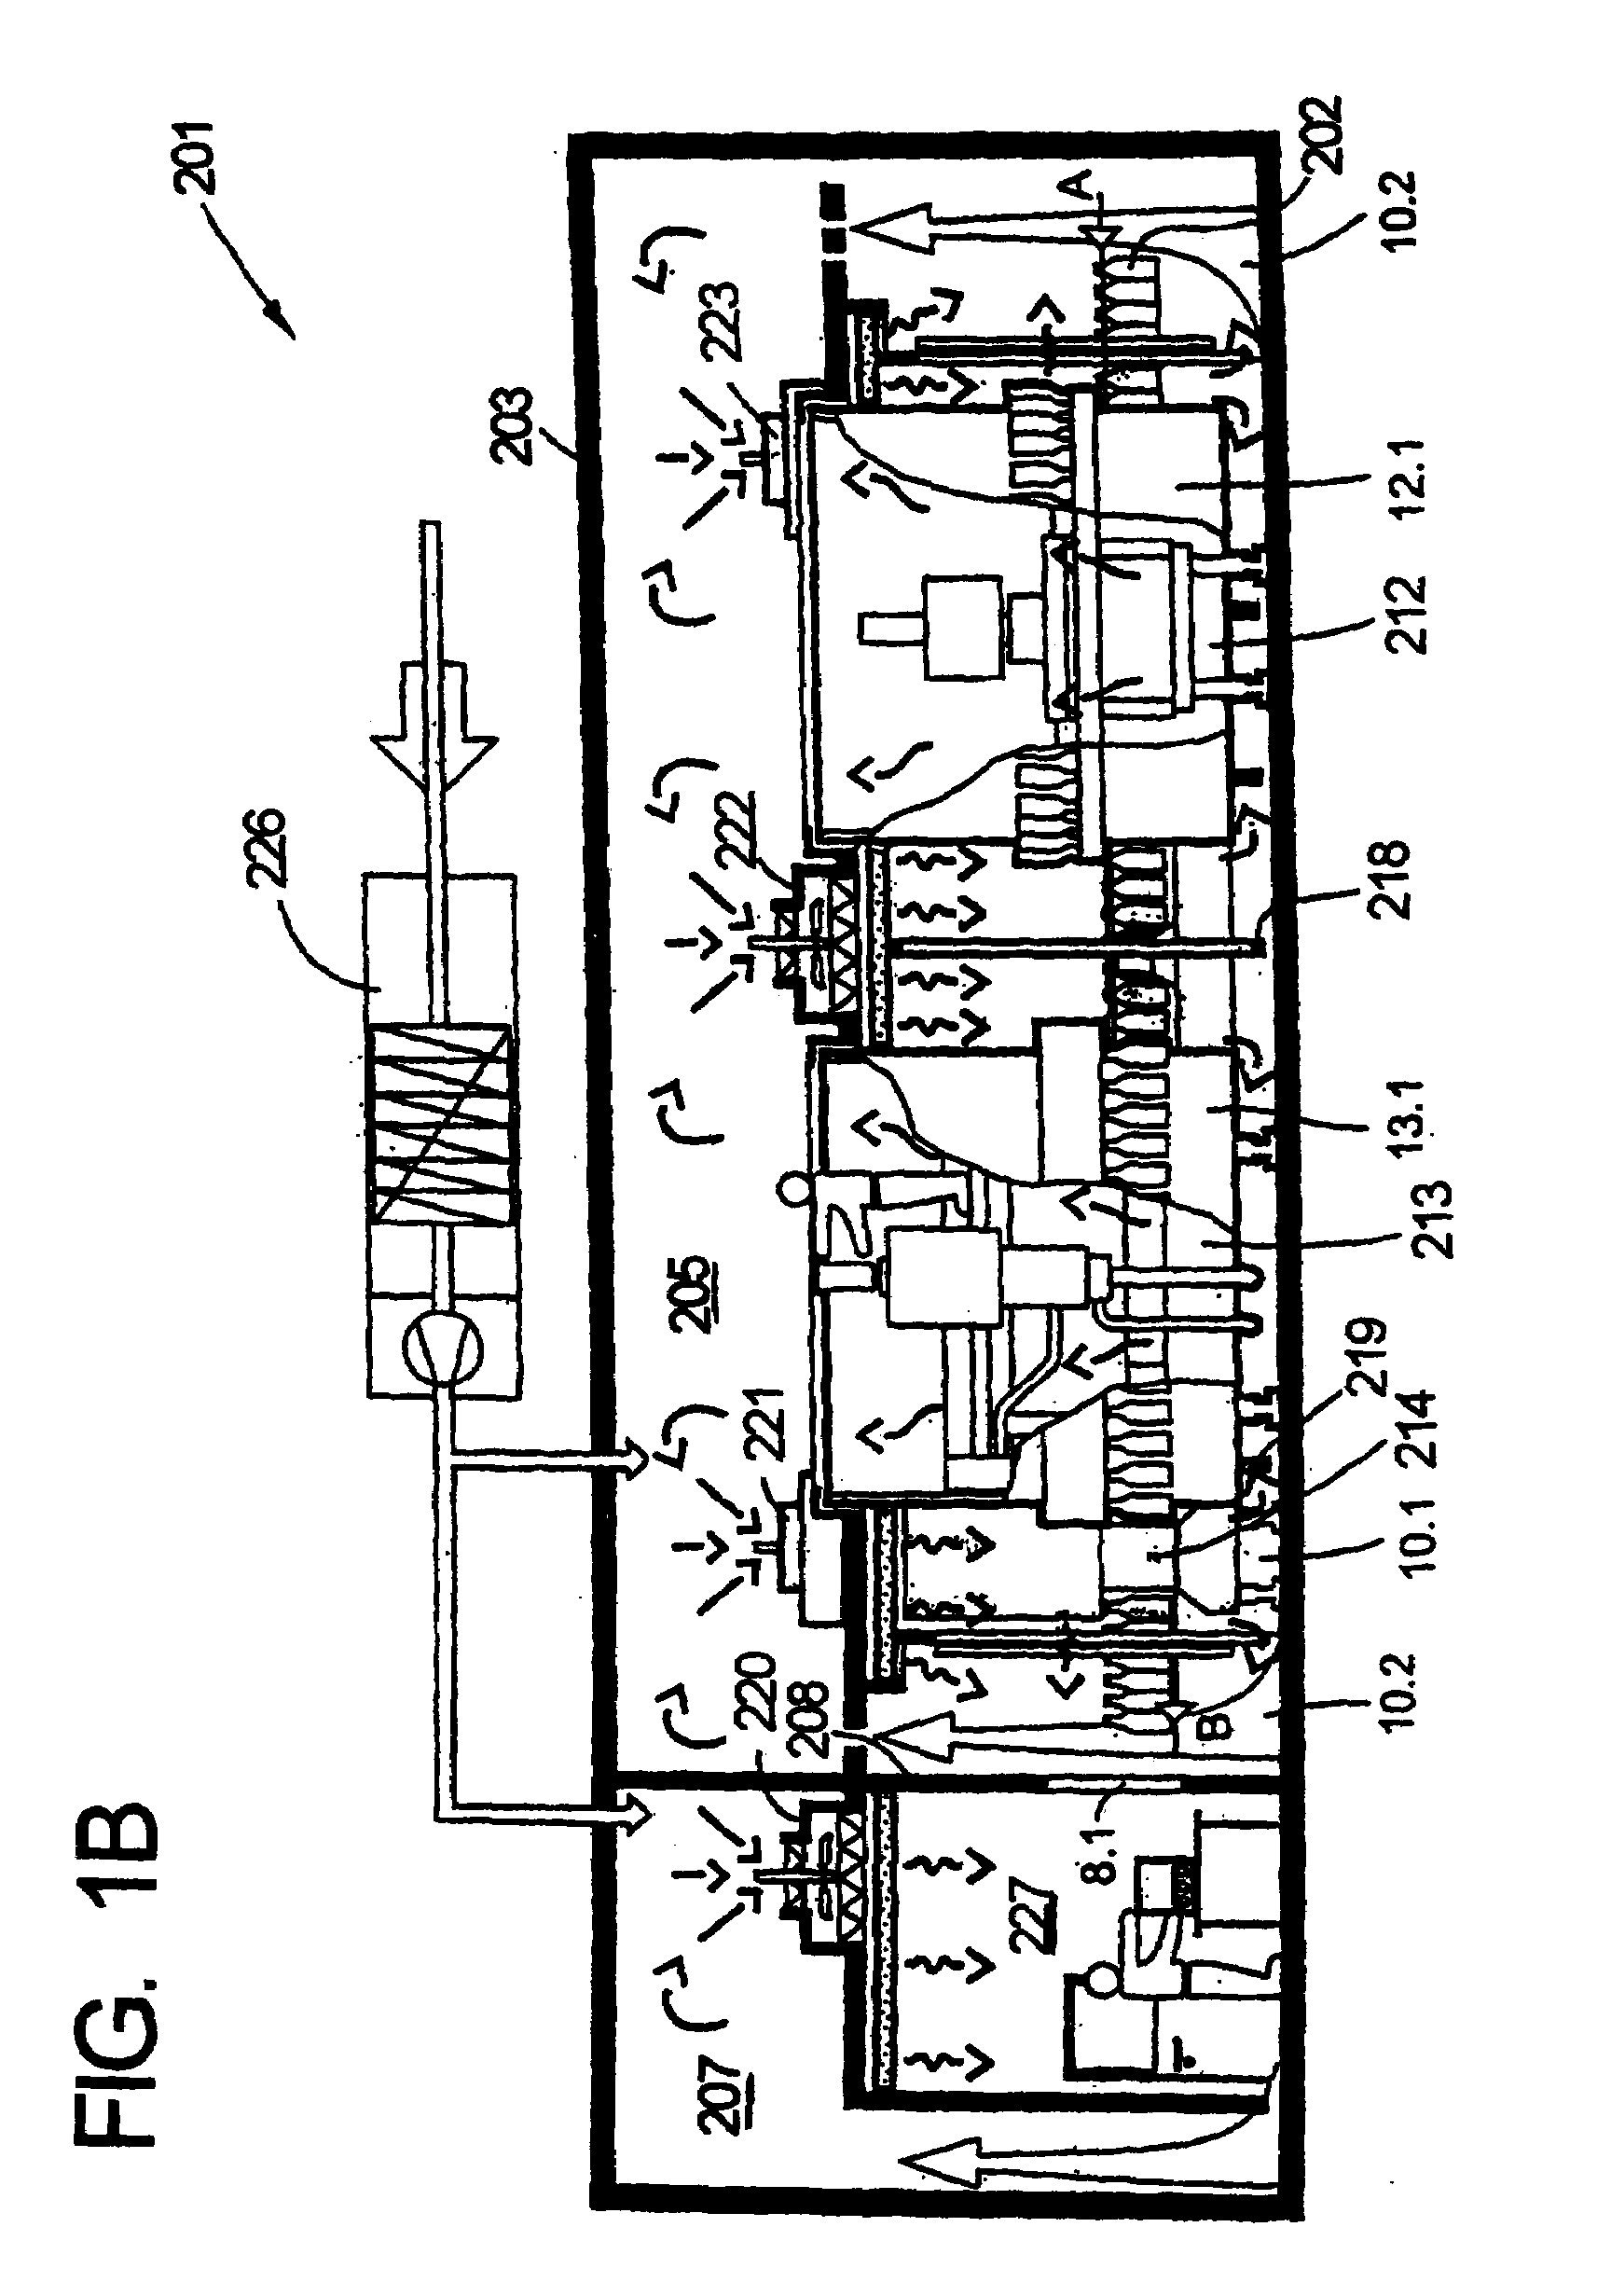 Method of operating a rotary beverage bottle or container filling or handling machine with a bearing with a cleaning arrangement in an aseptic clean room in a beverage bottling or container filling plant